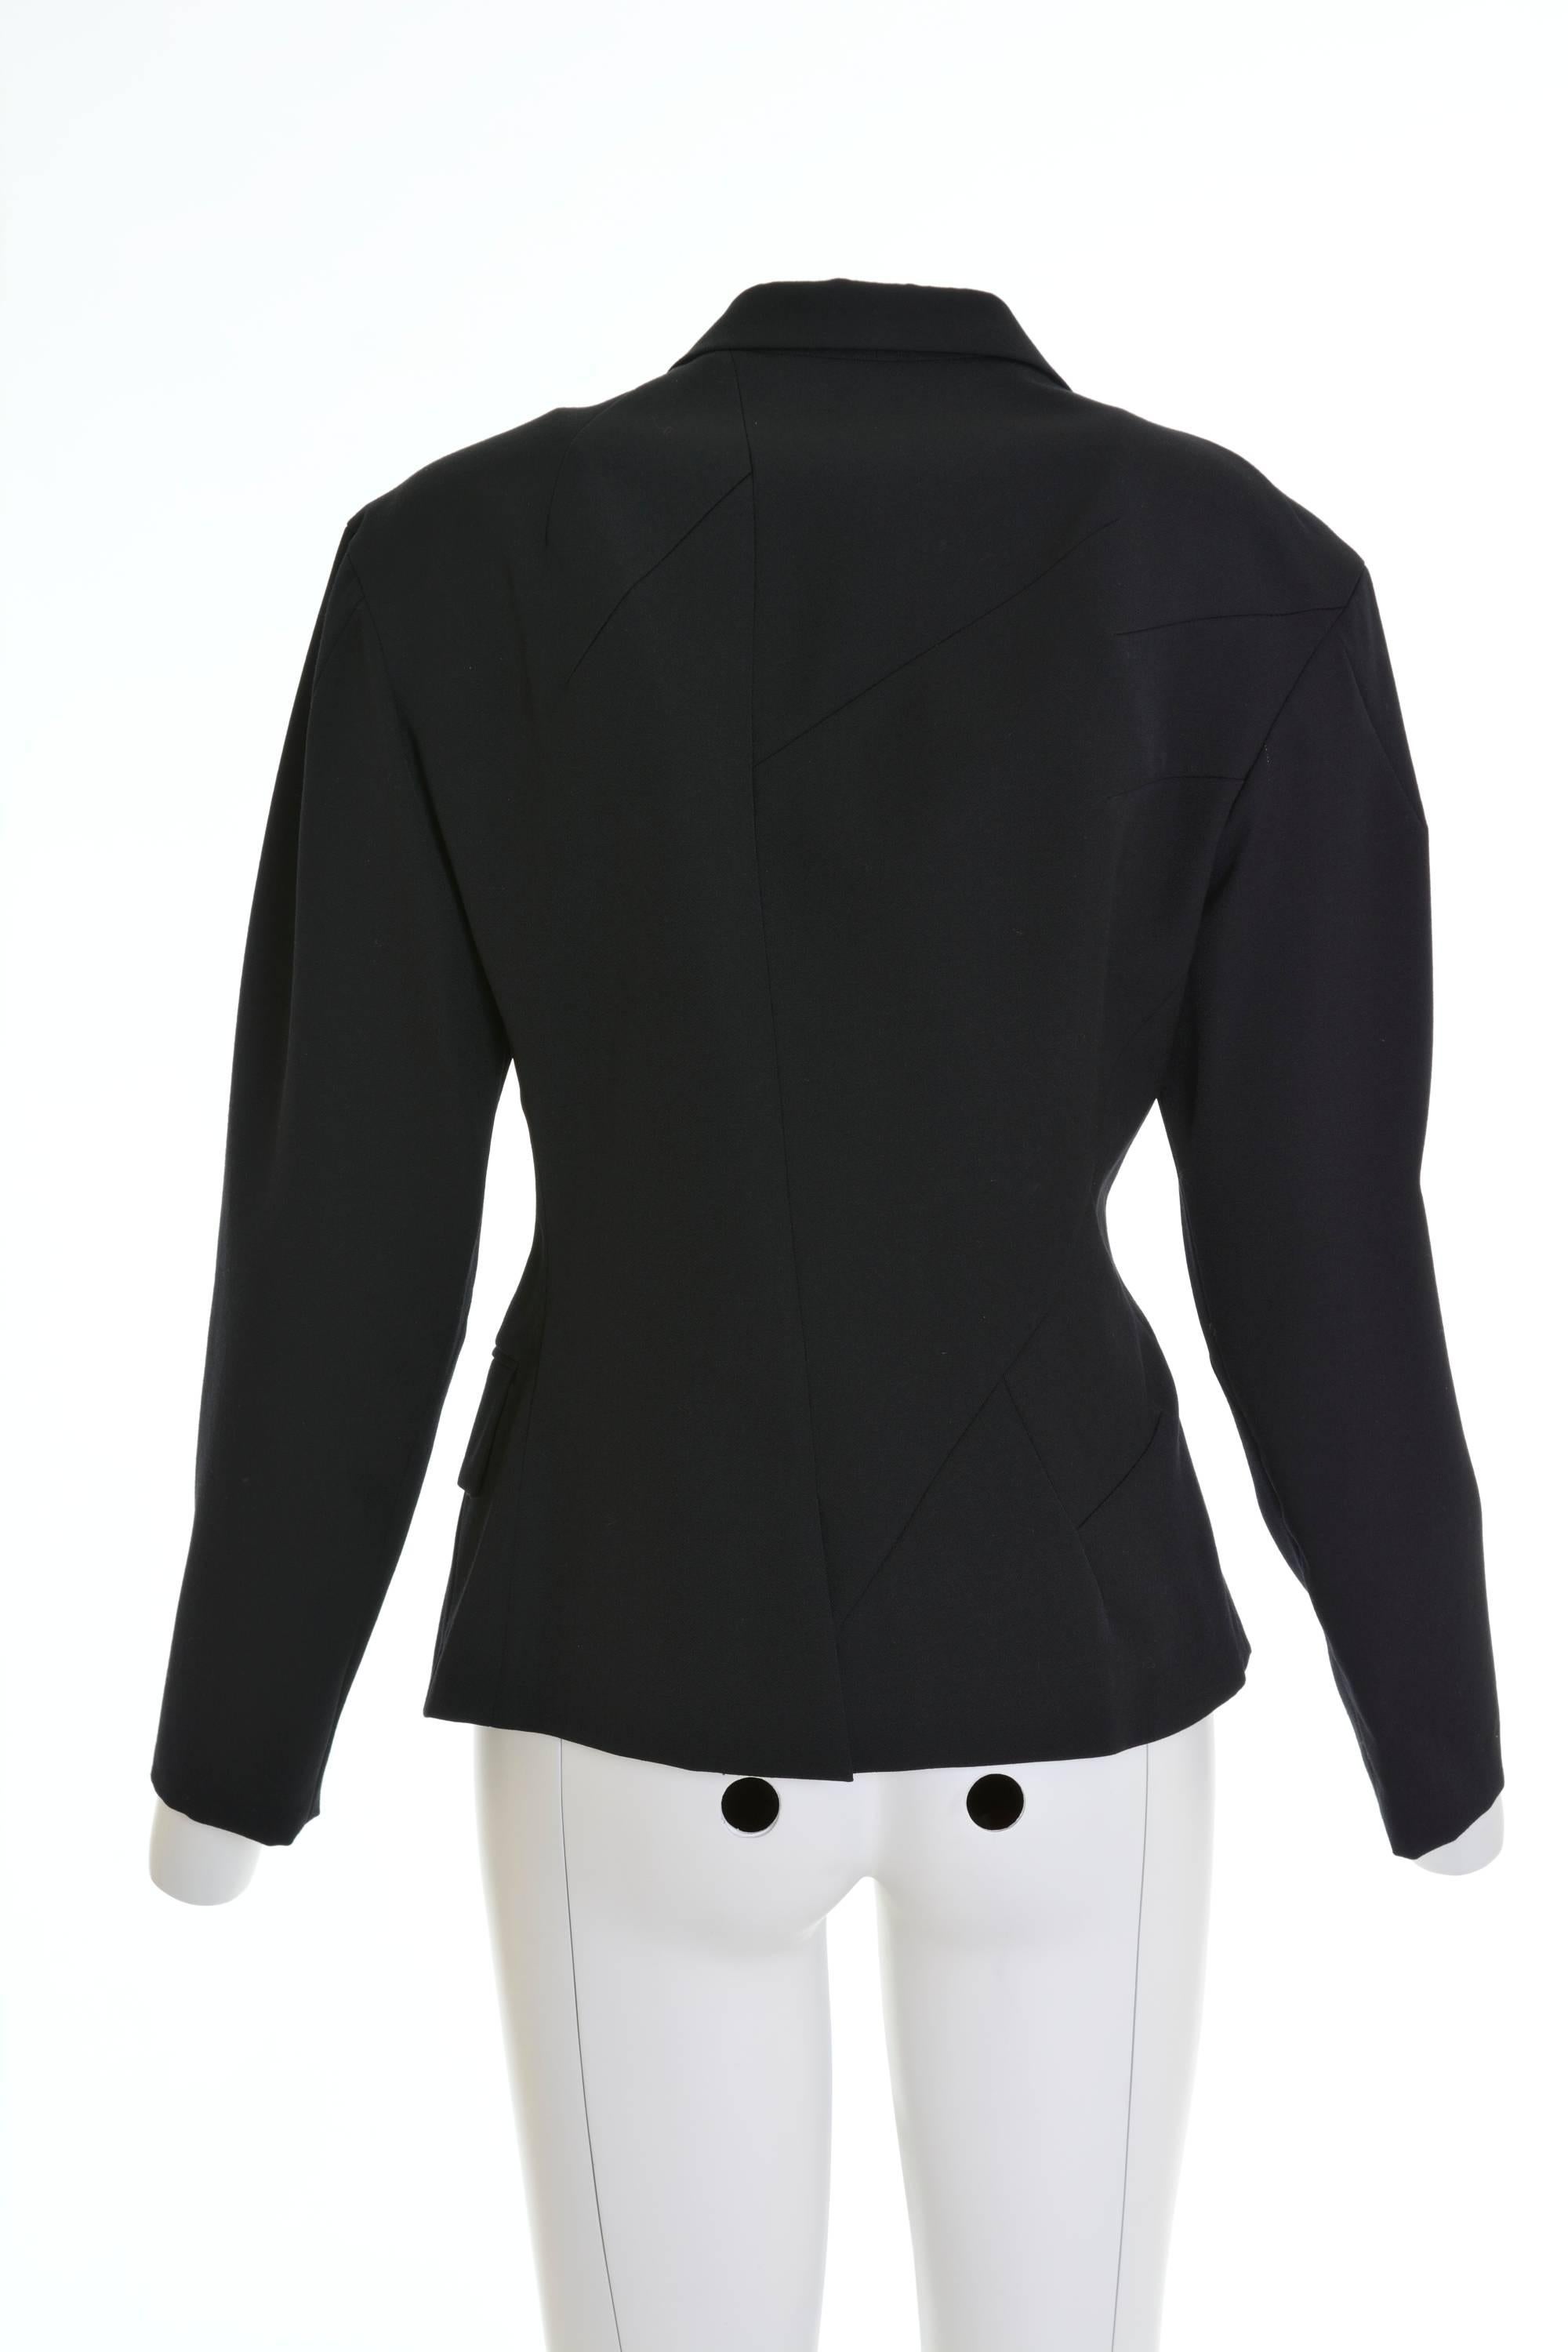 This iconic YOHJI YAMAMOTO Blazer Jacket is in black woolen gabardine fabric and has asymmetric construction, one flap pocket, double breasted closure and is fully satin lined.

Excellent condition

Label: Yohji Yamamoto 
Fabric: wool
Color: